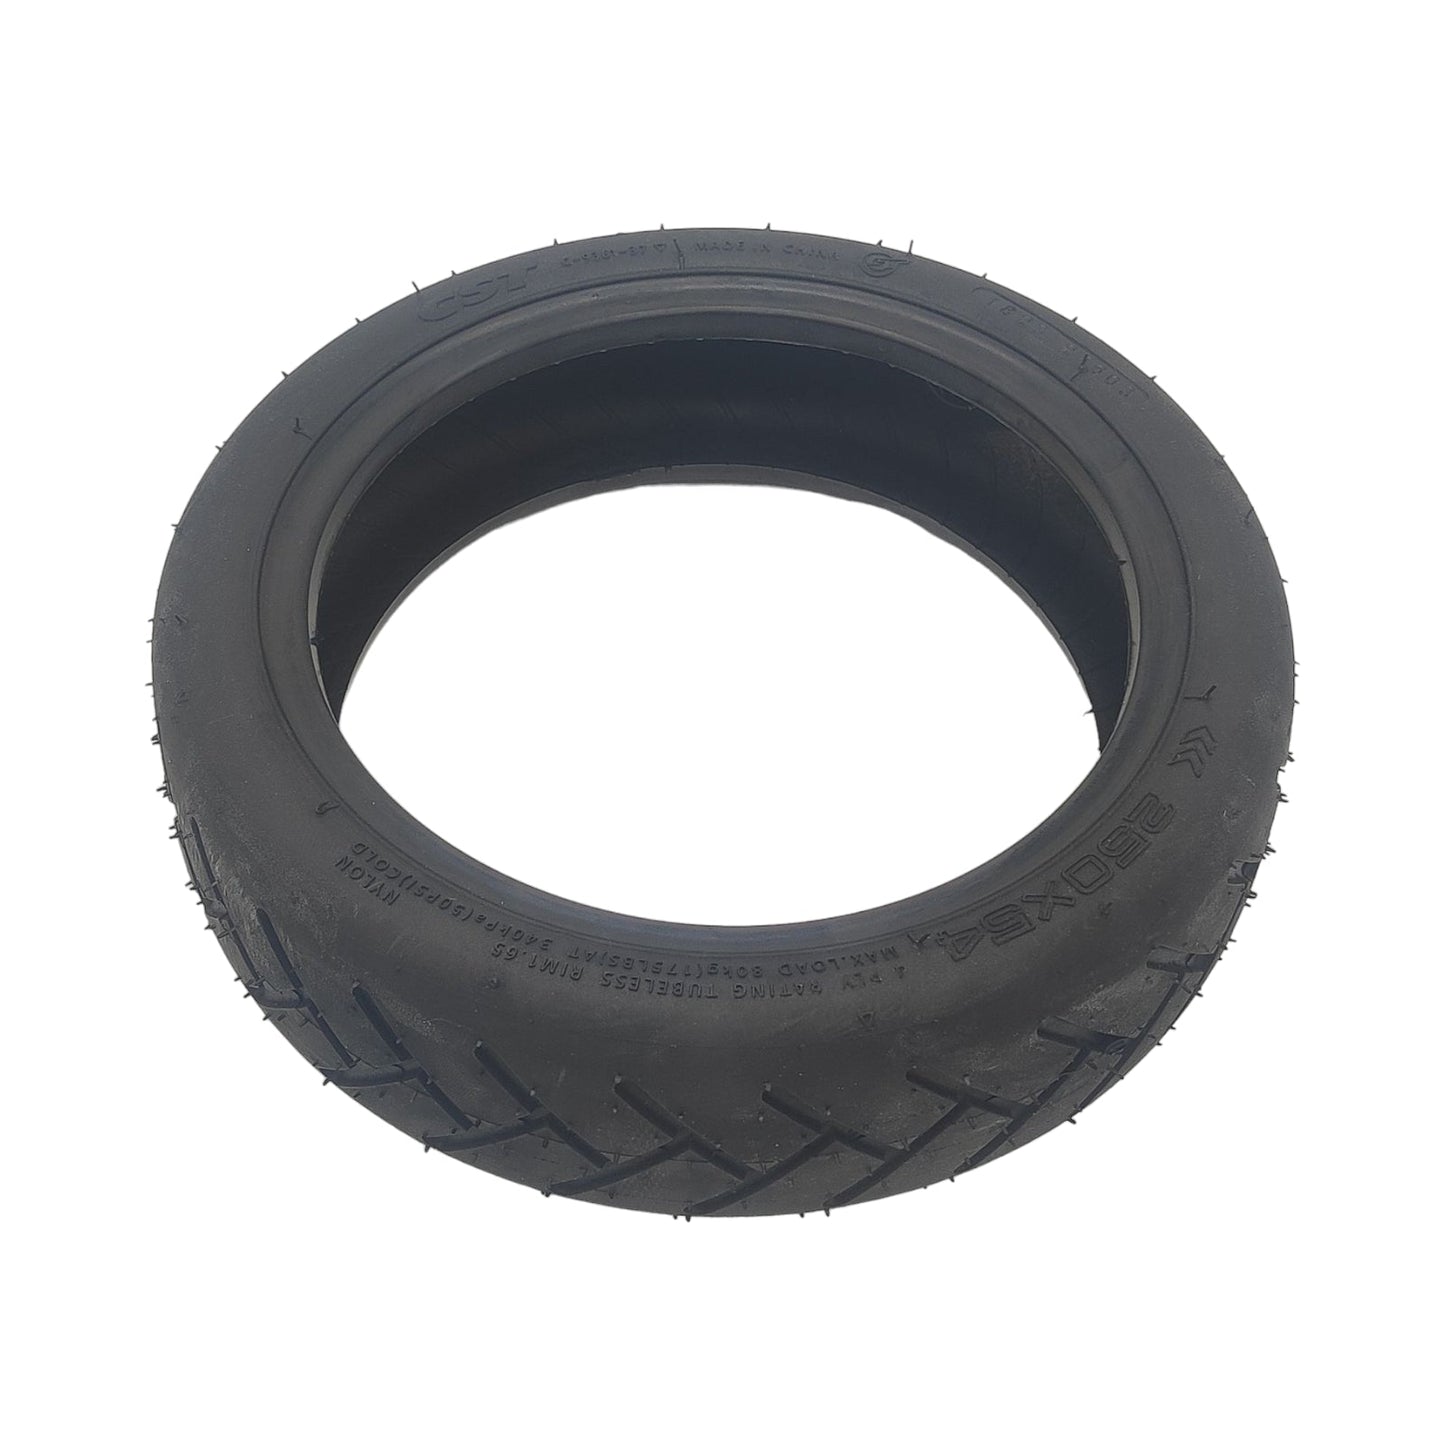 Xiaomi Mi 4 Tire Tubeless 250x54 CST with valve without gel layer